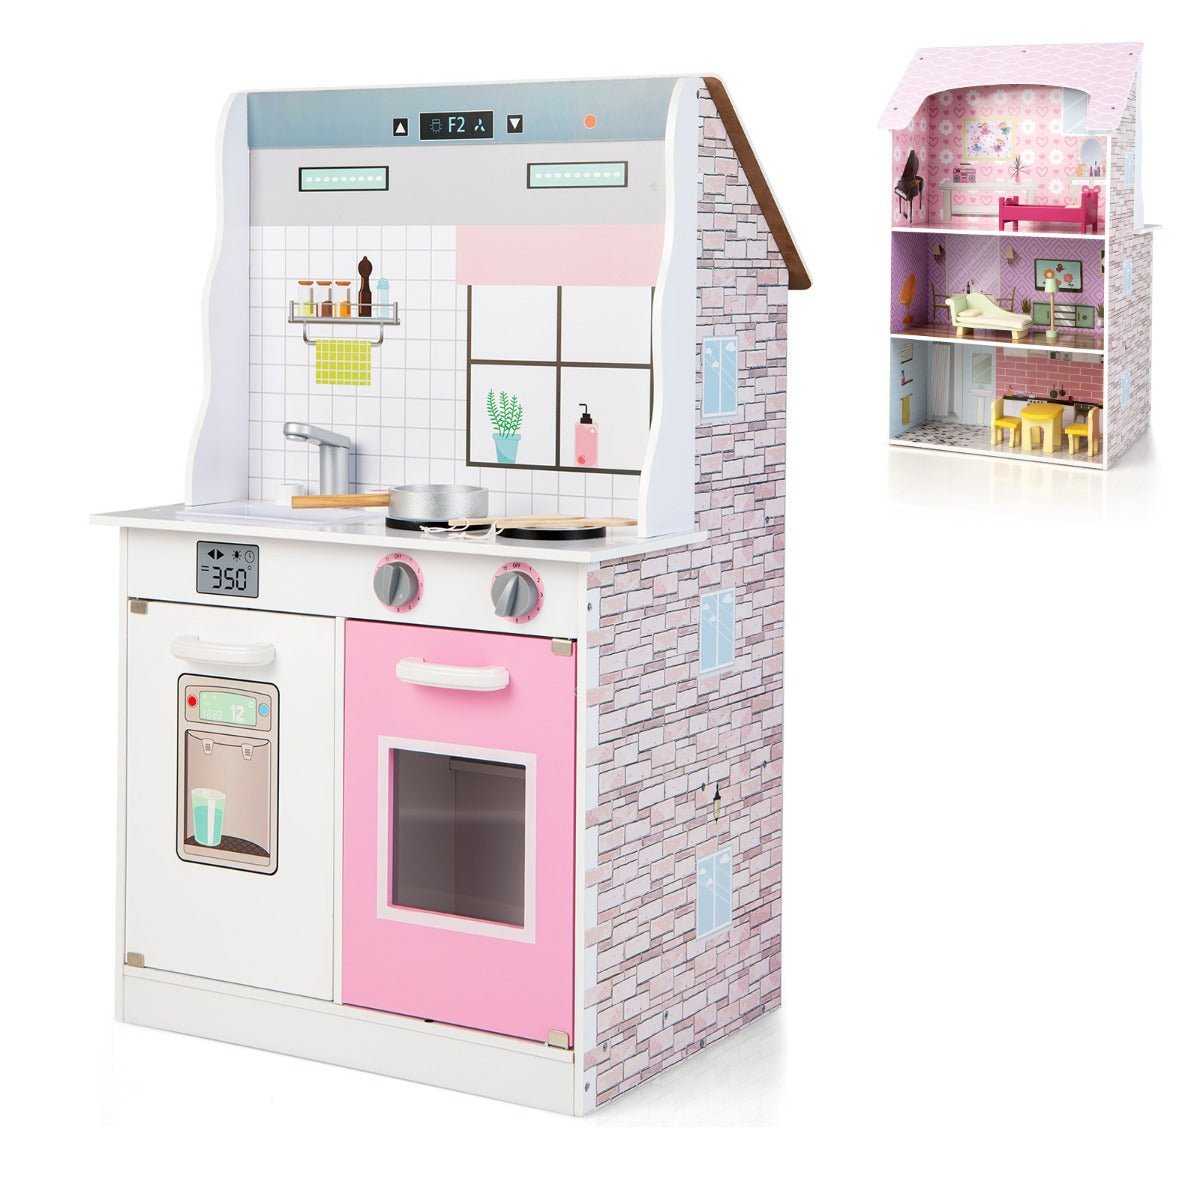 Shop the Perfect Dollhouse and Kitchen Toy Now